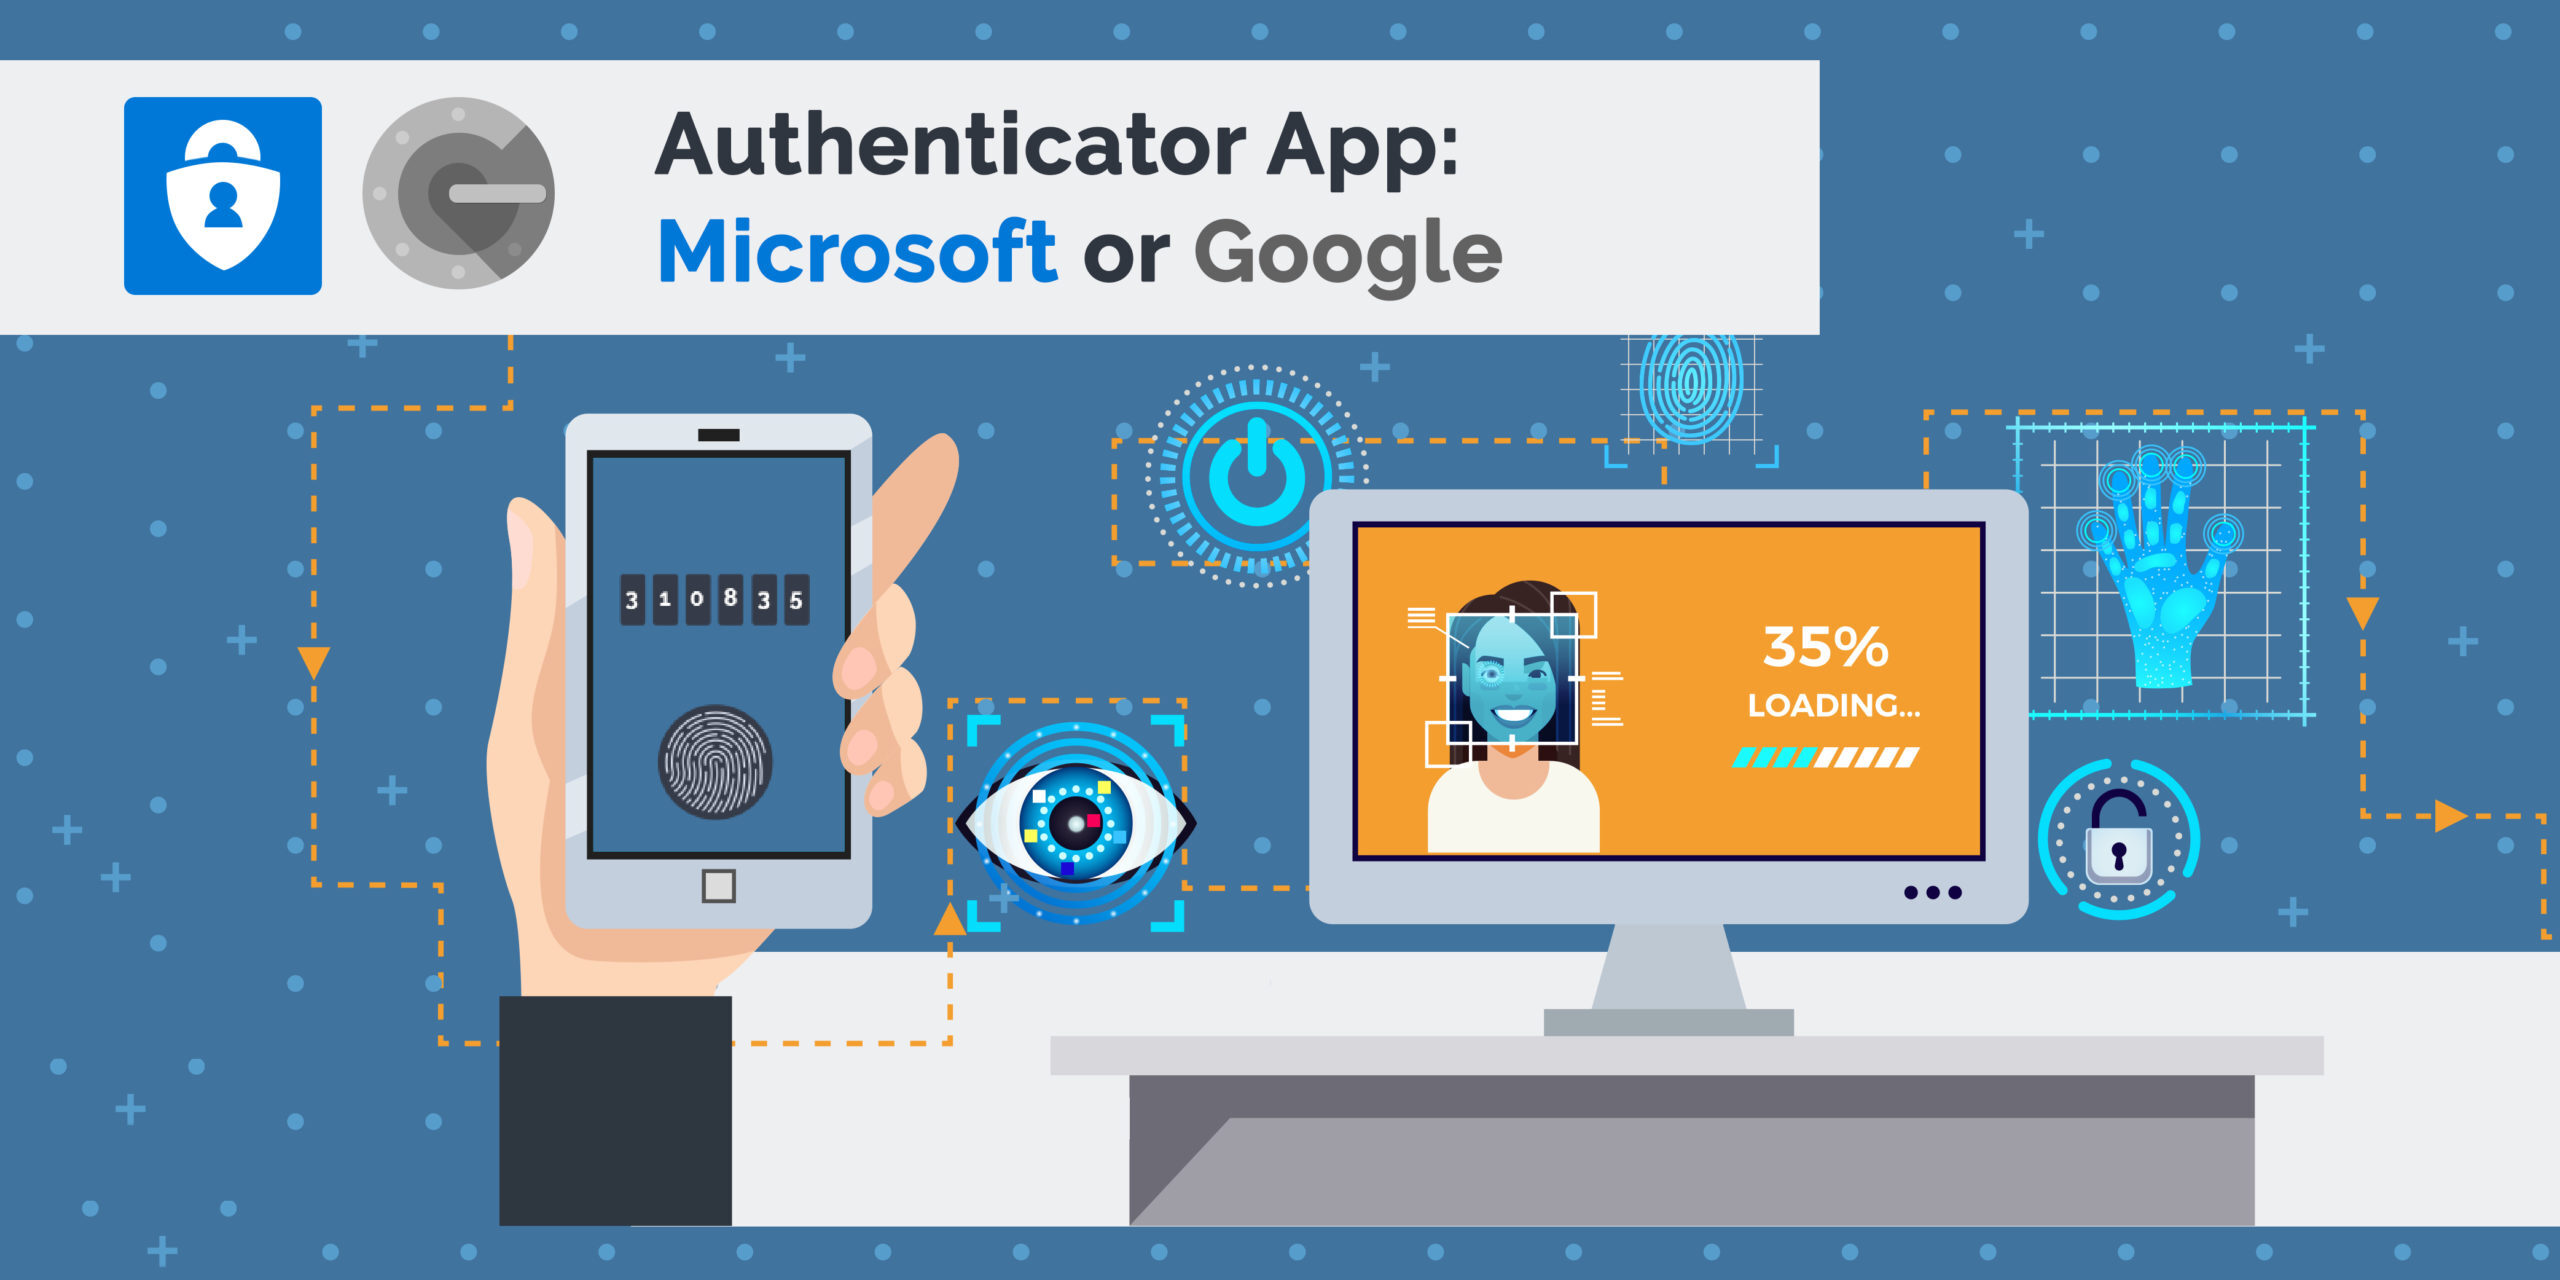 How To Transfer Google Authenticator To Microsoft Authenticator